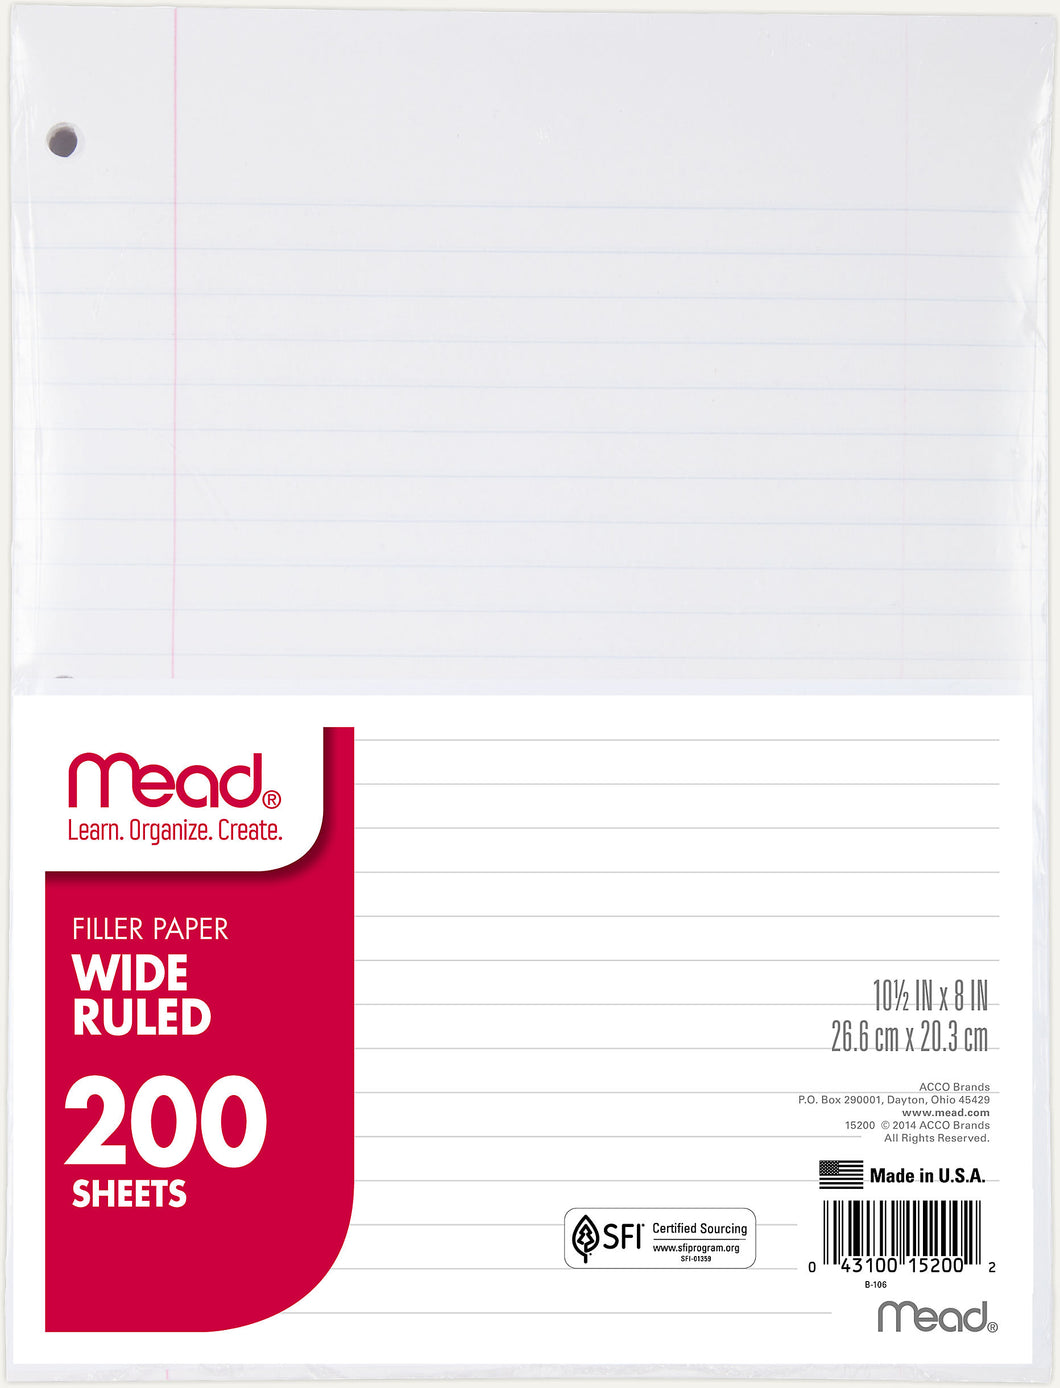 Mead Filler Paper Wide Ruled 200 sheets